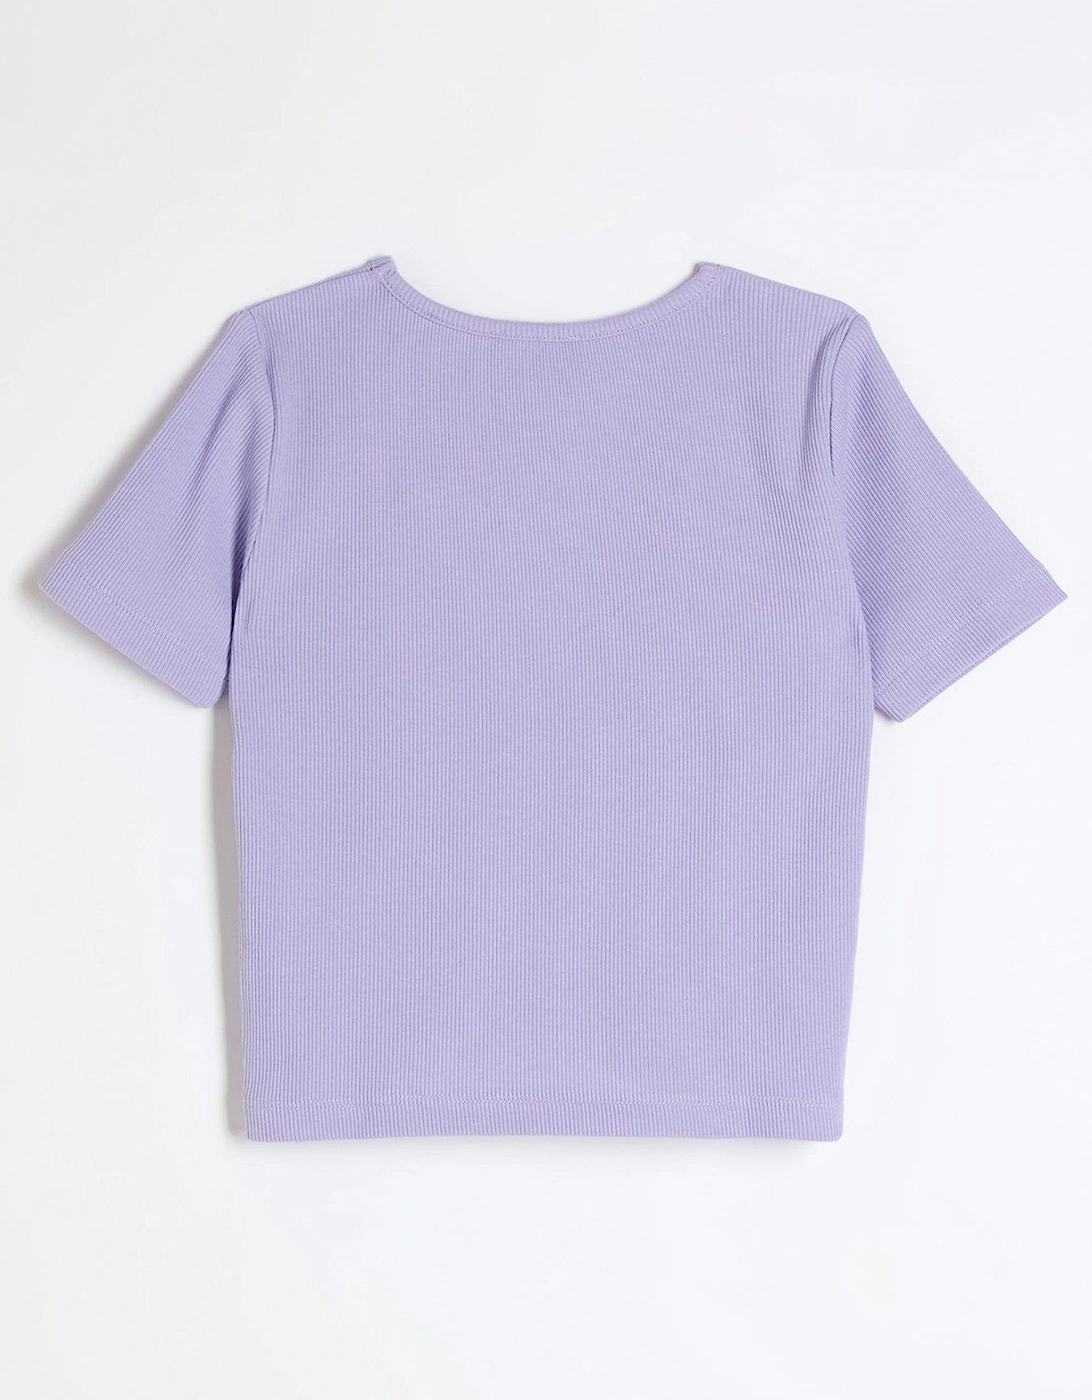 Girls Ribbed Cut Out T-shirt - Blue